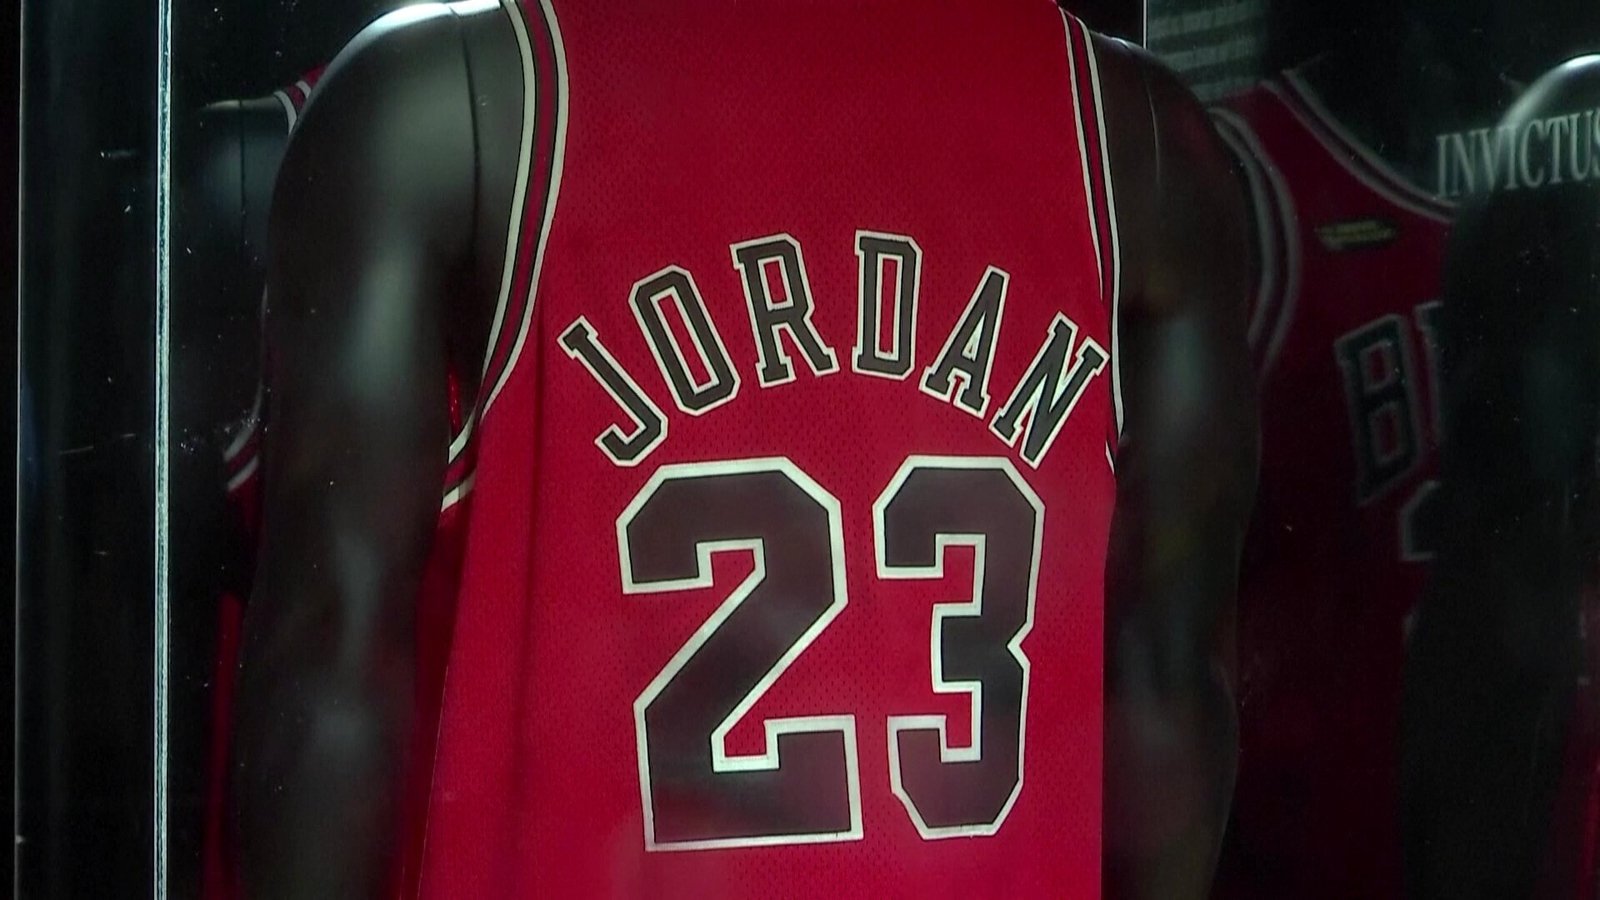 Michael Jordan's game-worn jersey from 1998 fetches a whopping $10